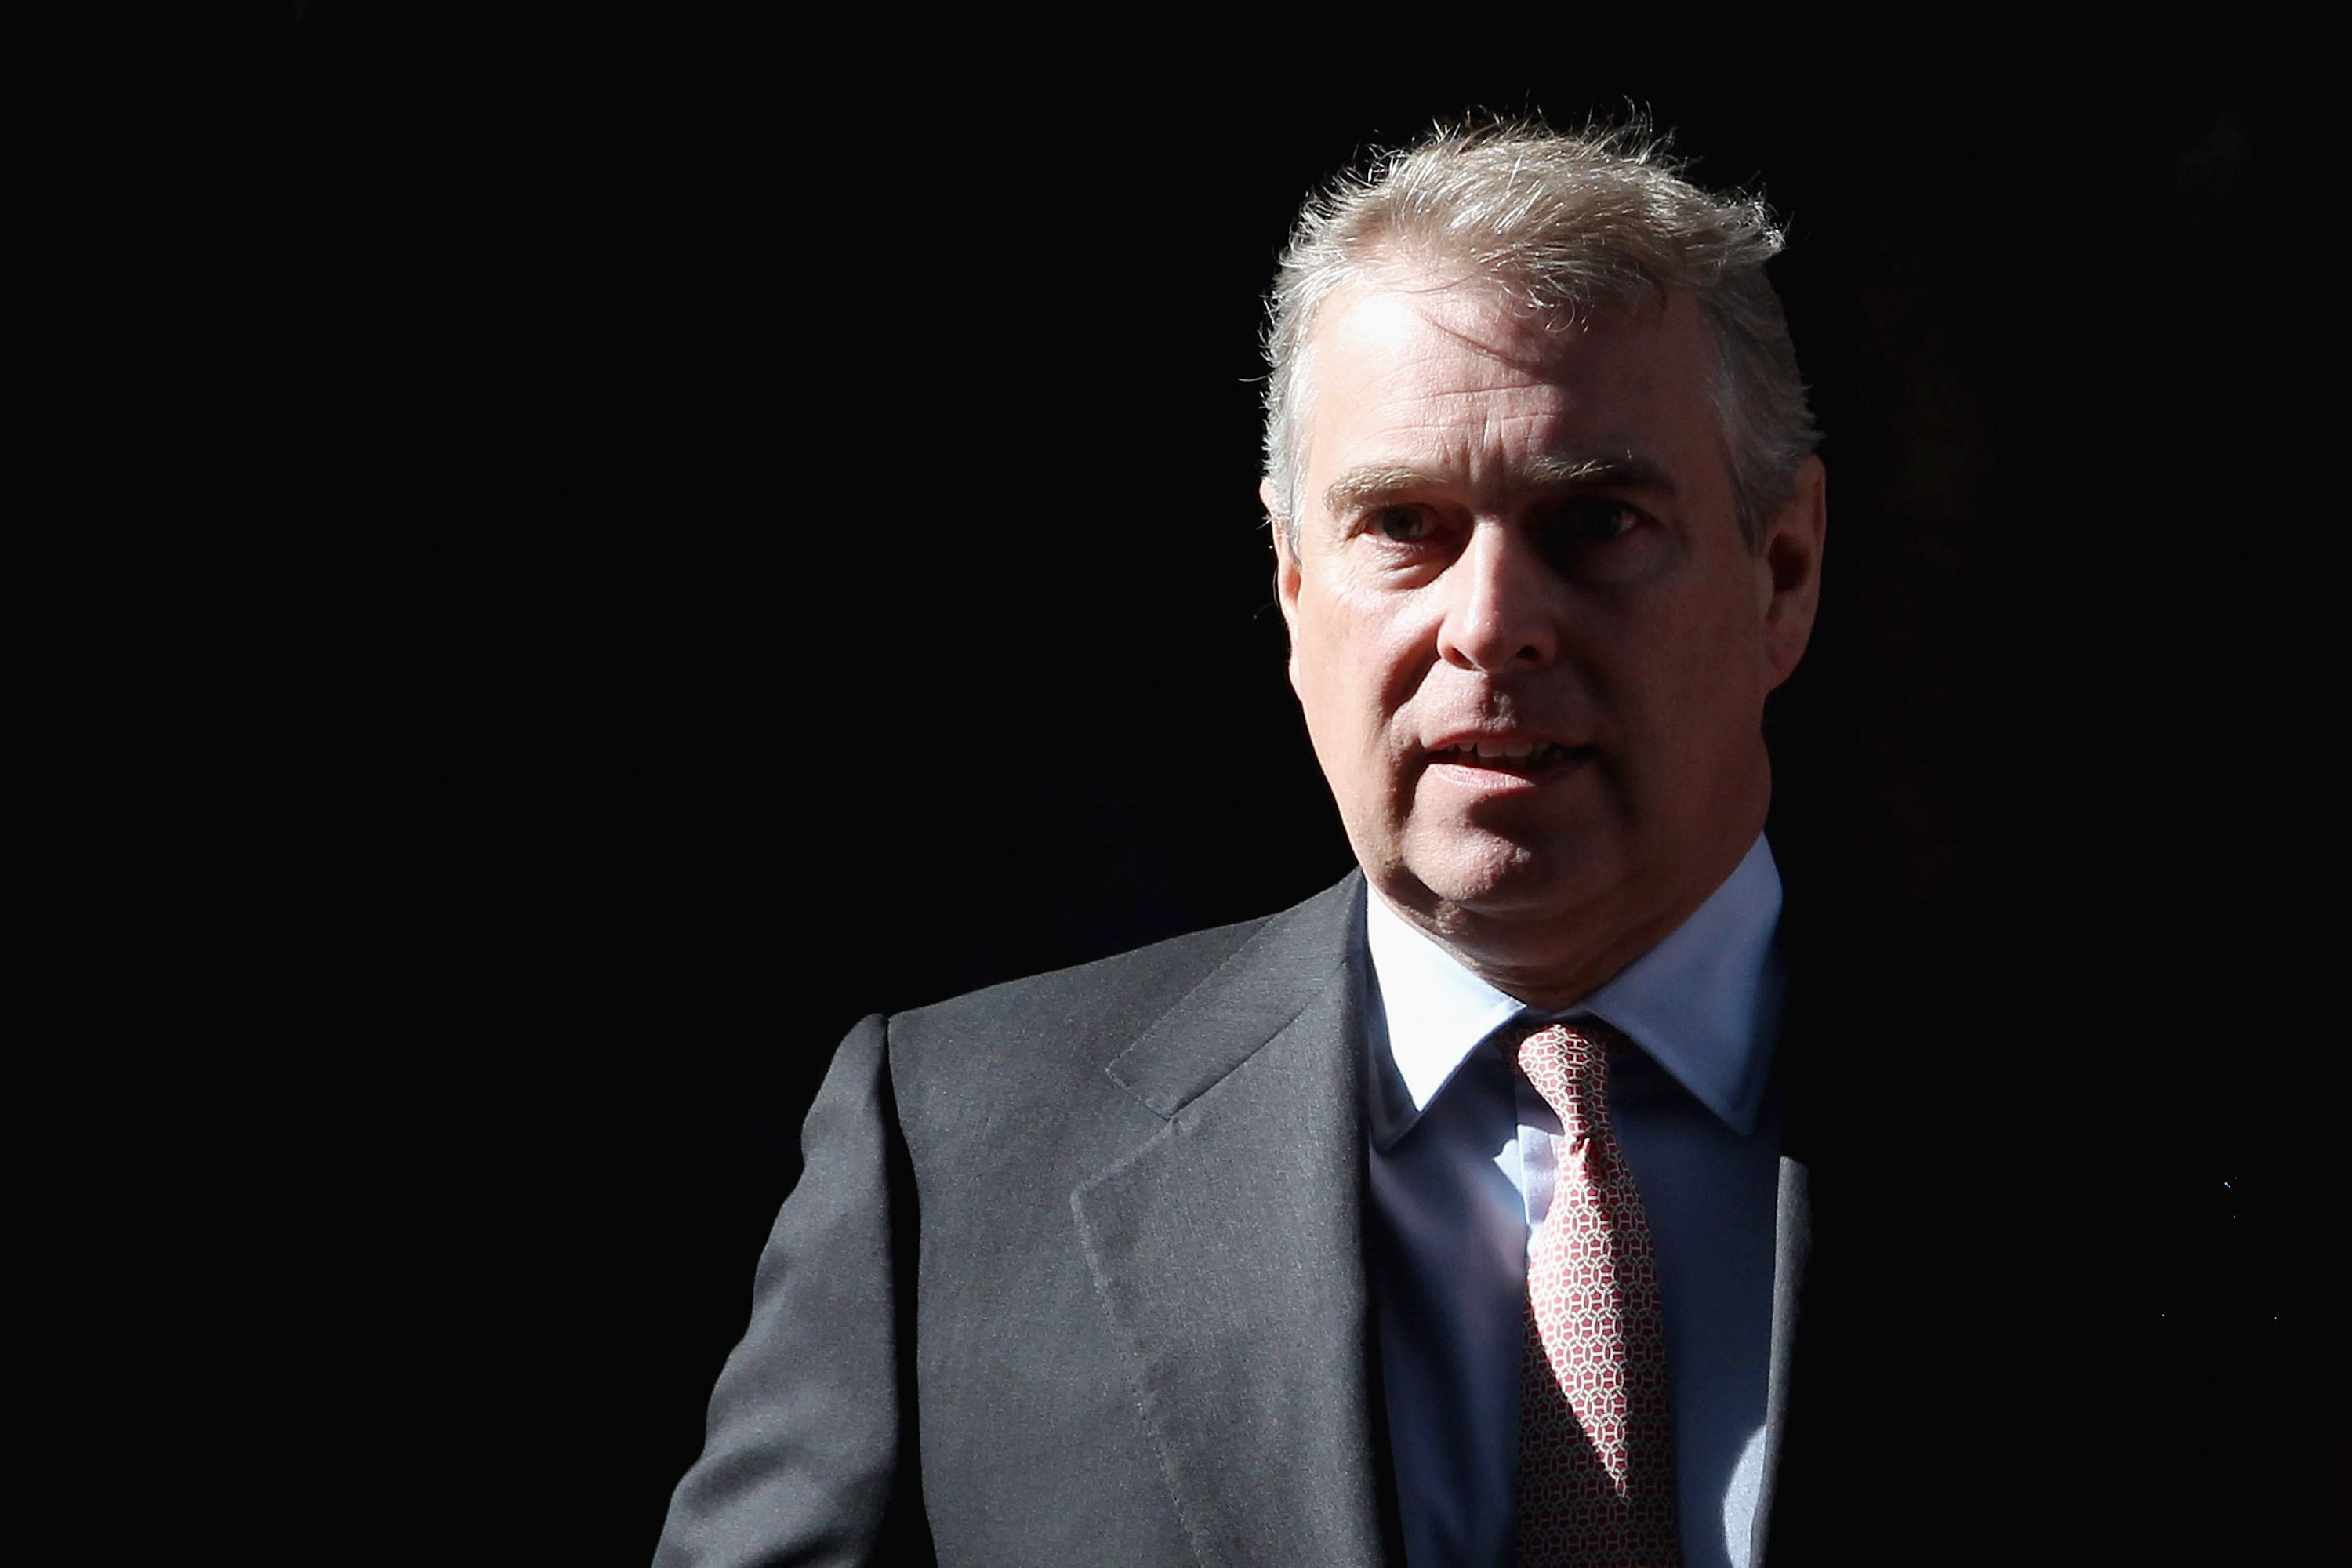 Prince Andrew ‘Would Shout and Scream’ Strange Demands About Stuffed Animals at His Housekeepers, Former Protection Officer Reveals